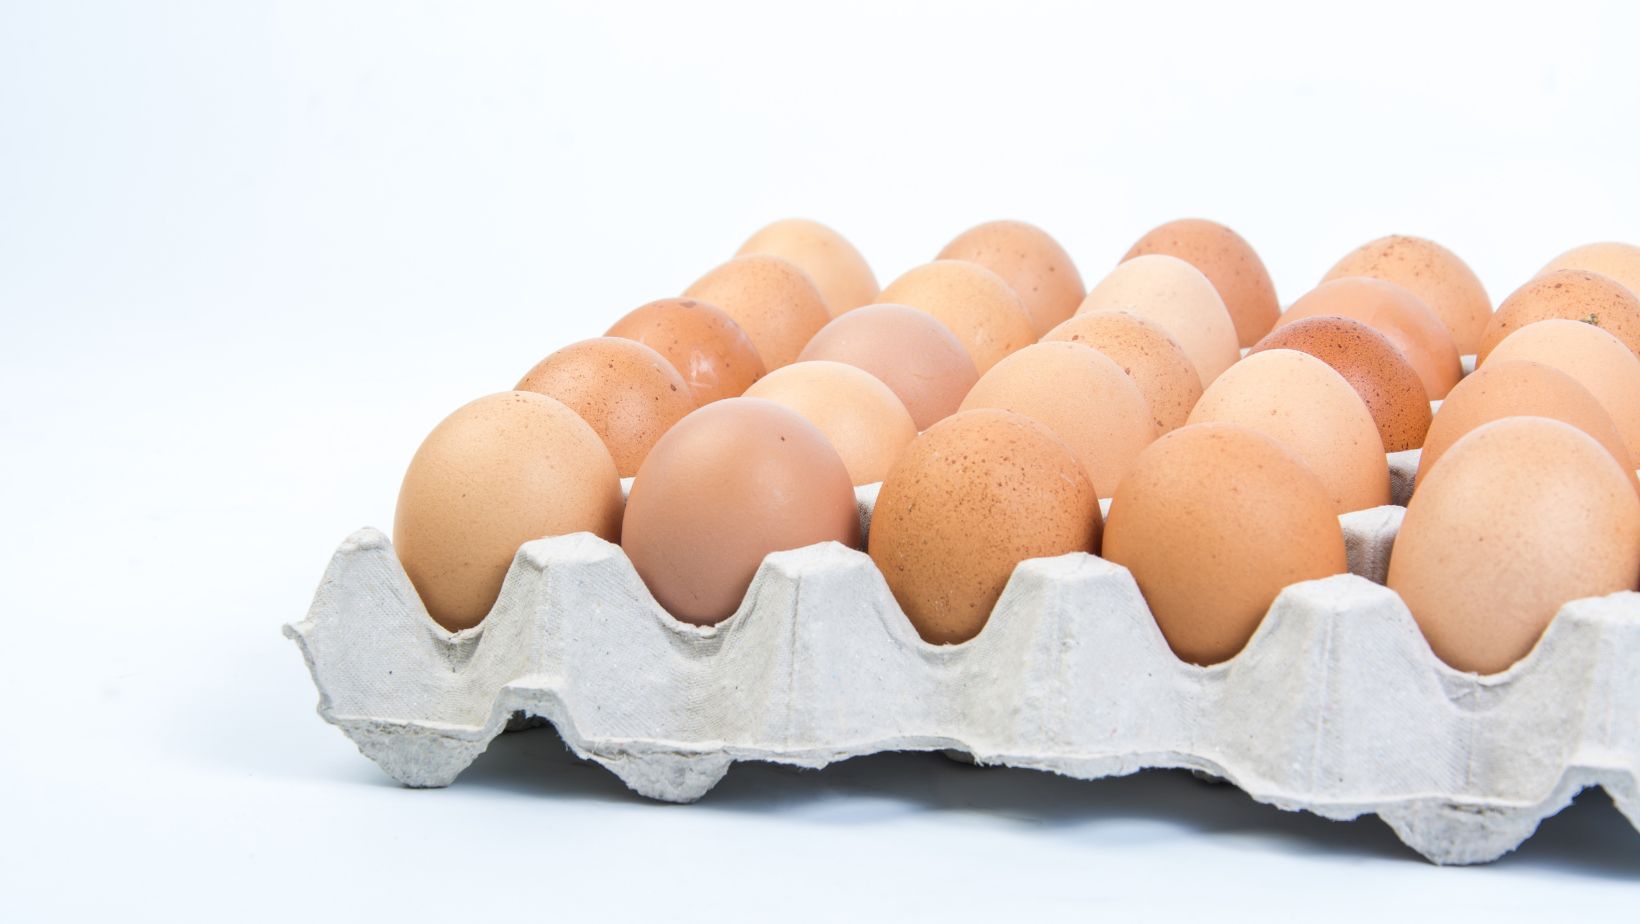 10 Ways For Preppers To Use Egg Crates